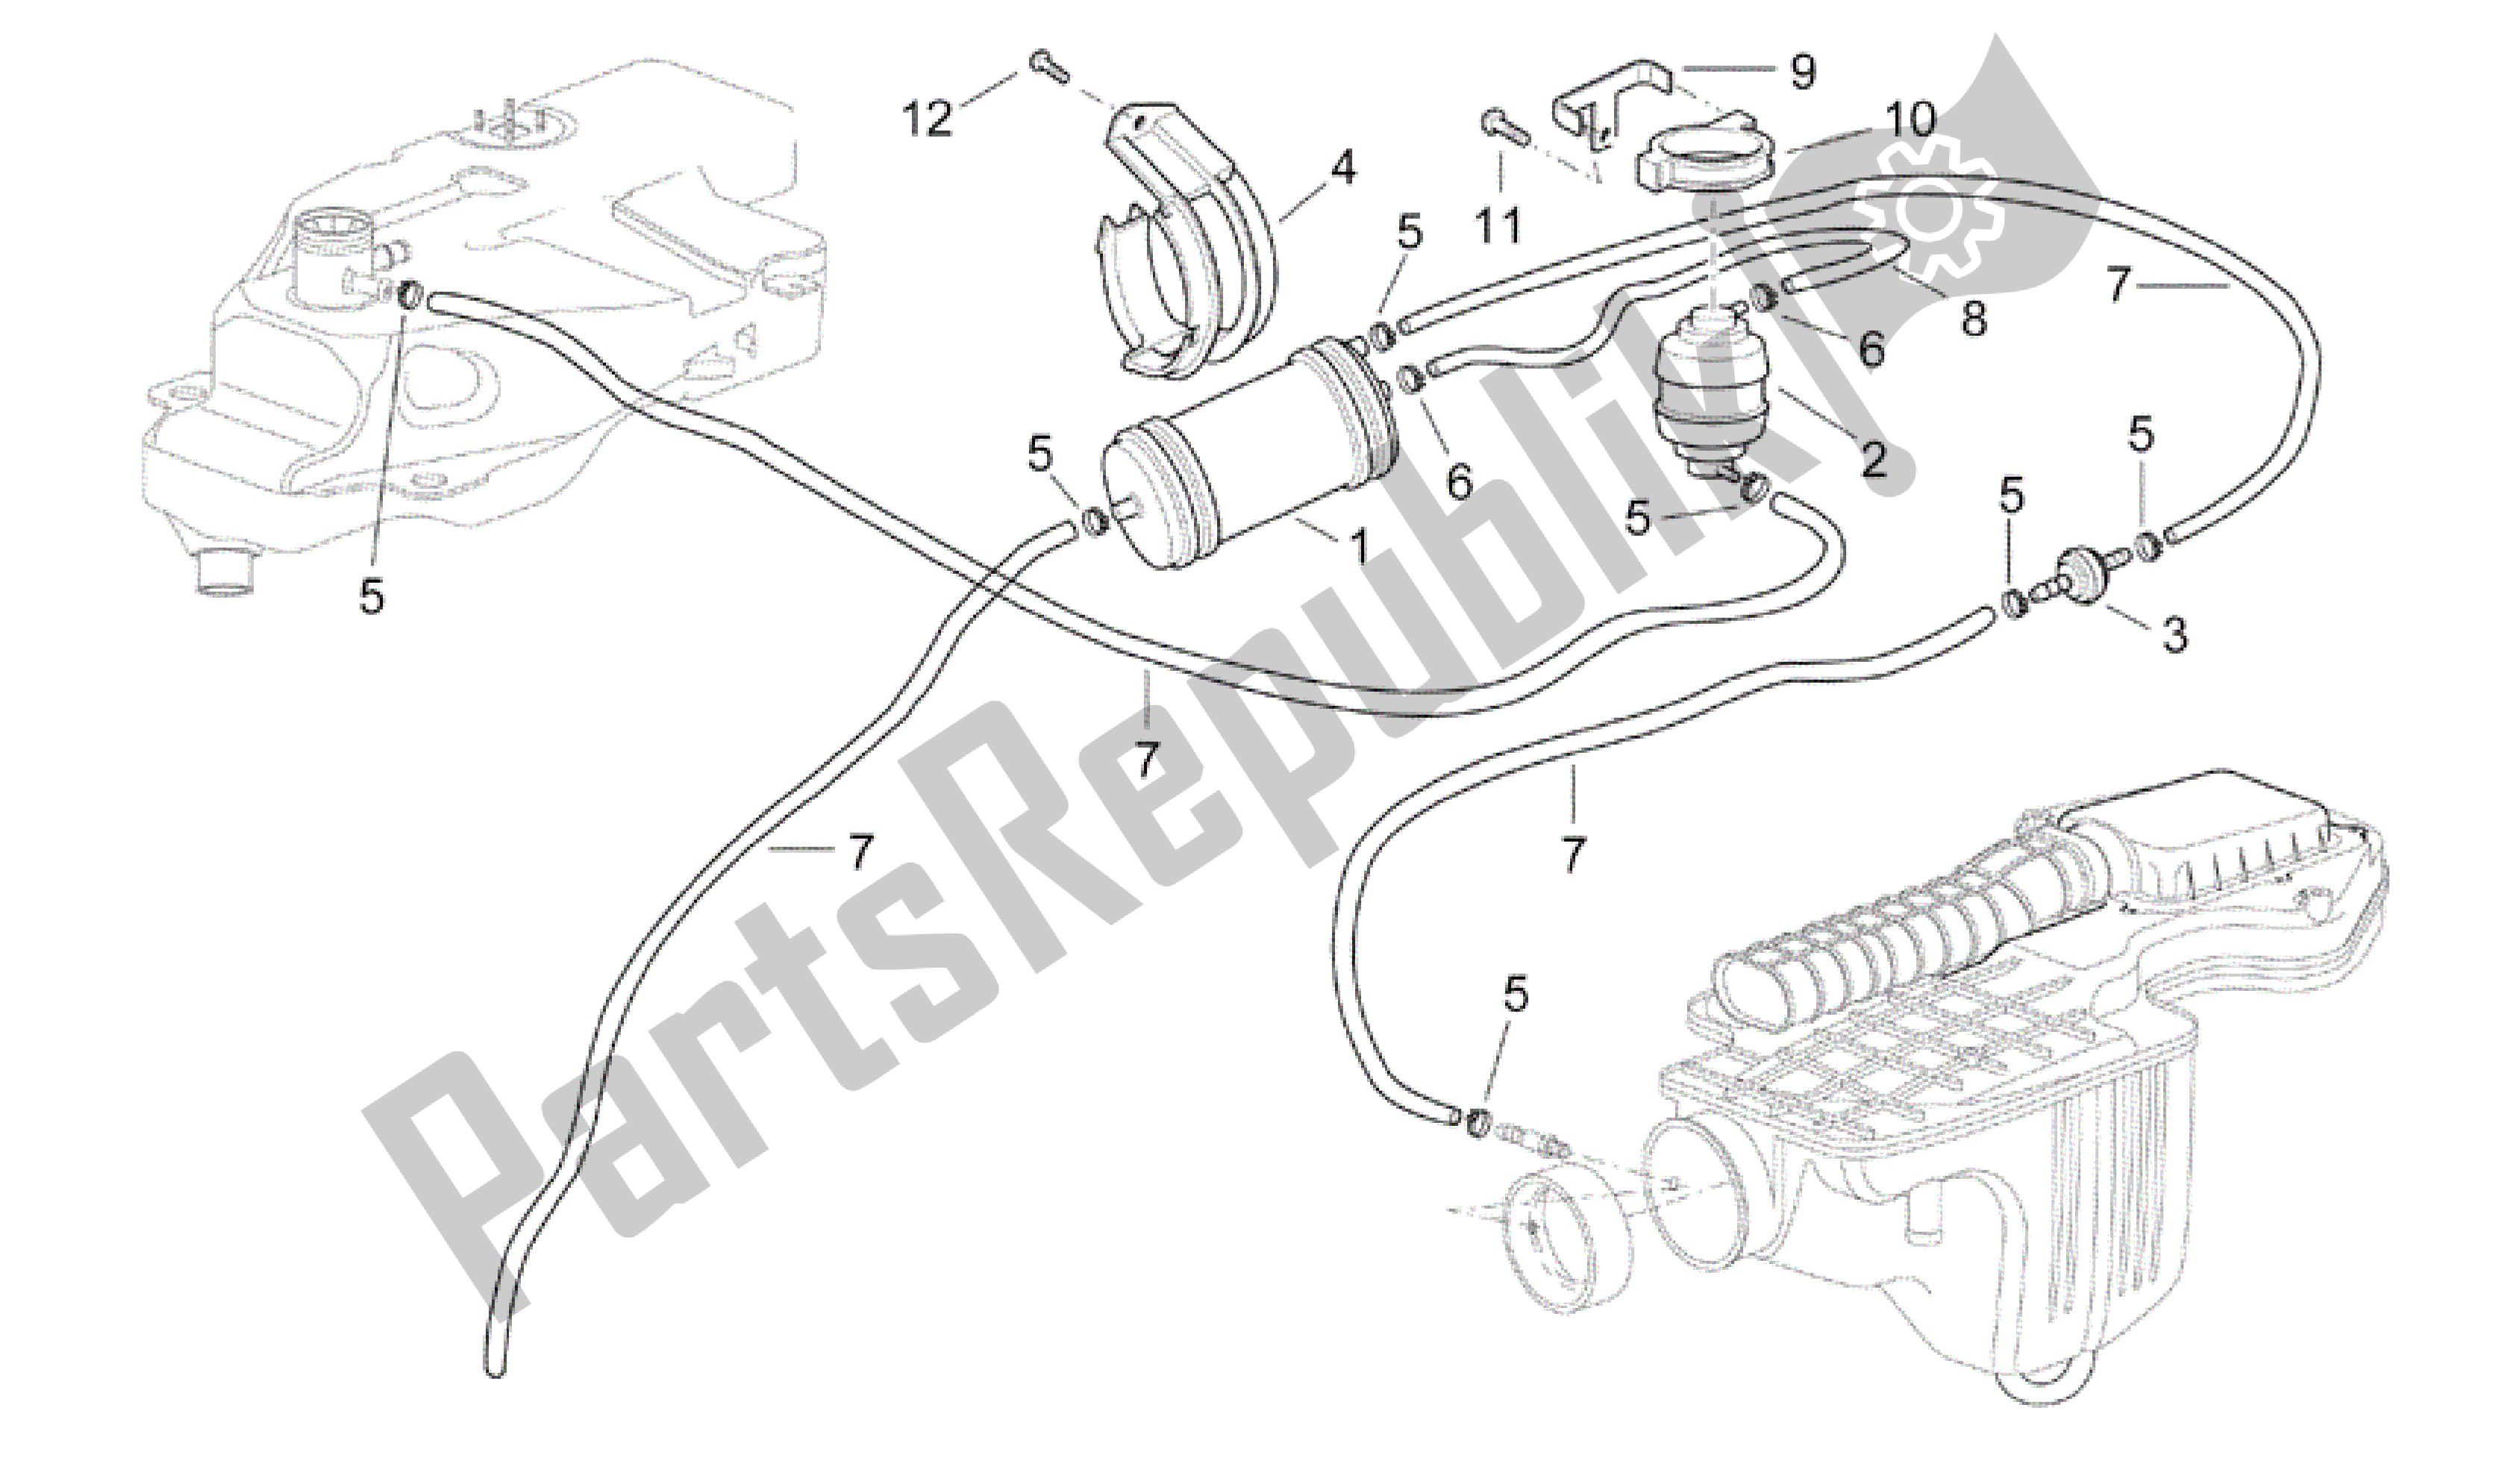 All parts for the Fuel Vapour Recover System of the Aprilia Scarabeo 500 2003 - 2006